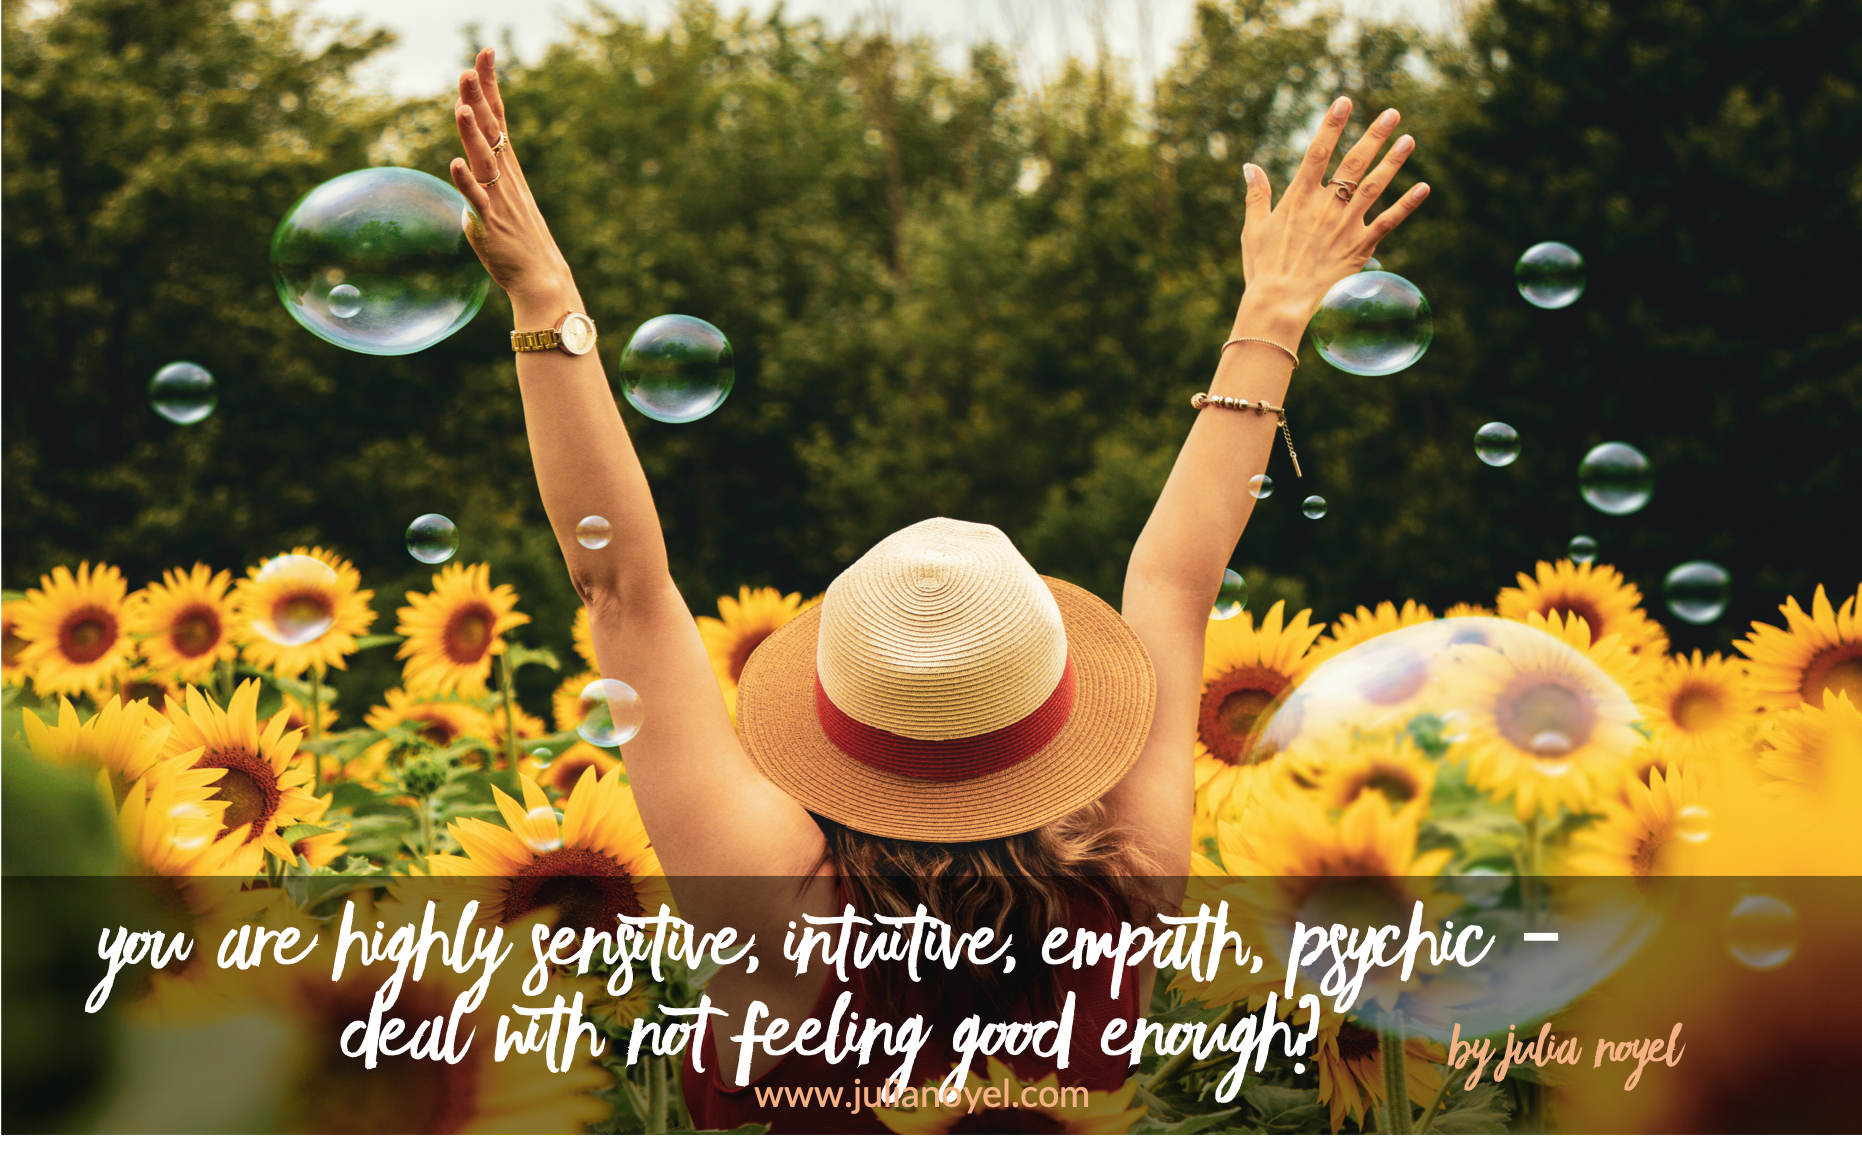 You are highly sensitive, intuitive empath, psychic – deal with not feeling good enough?